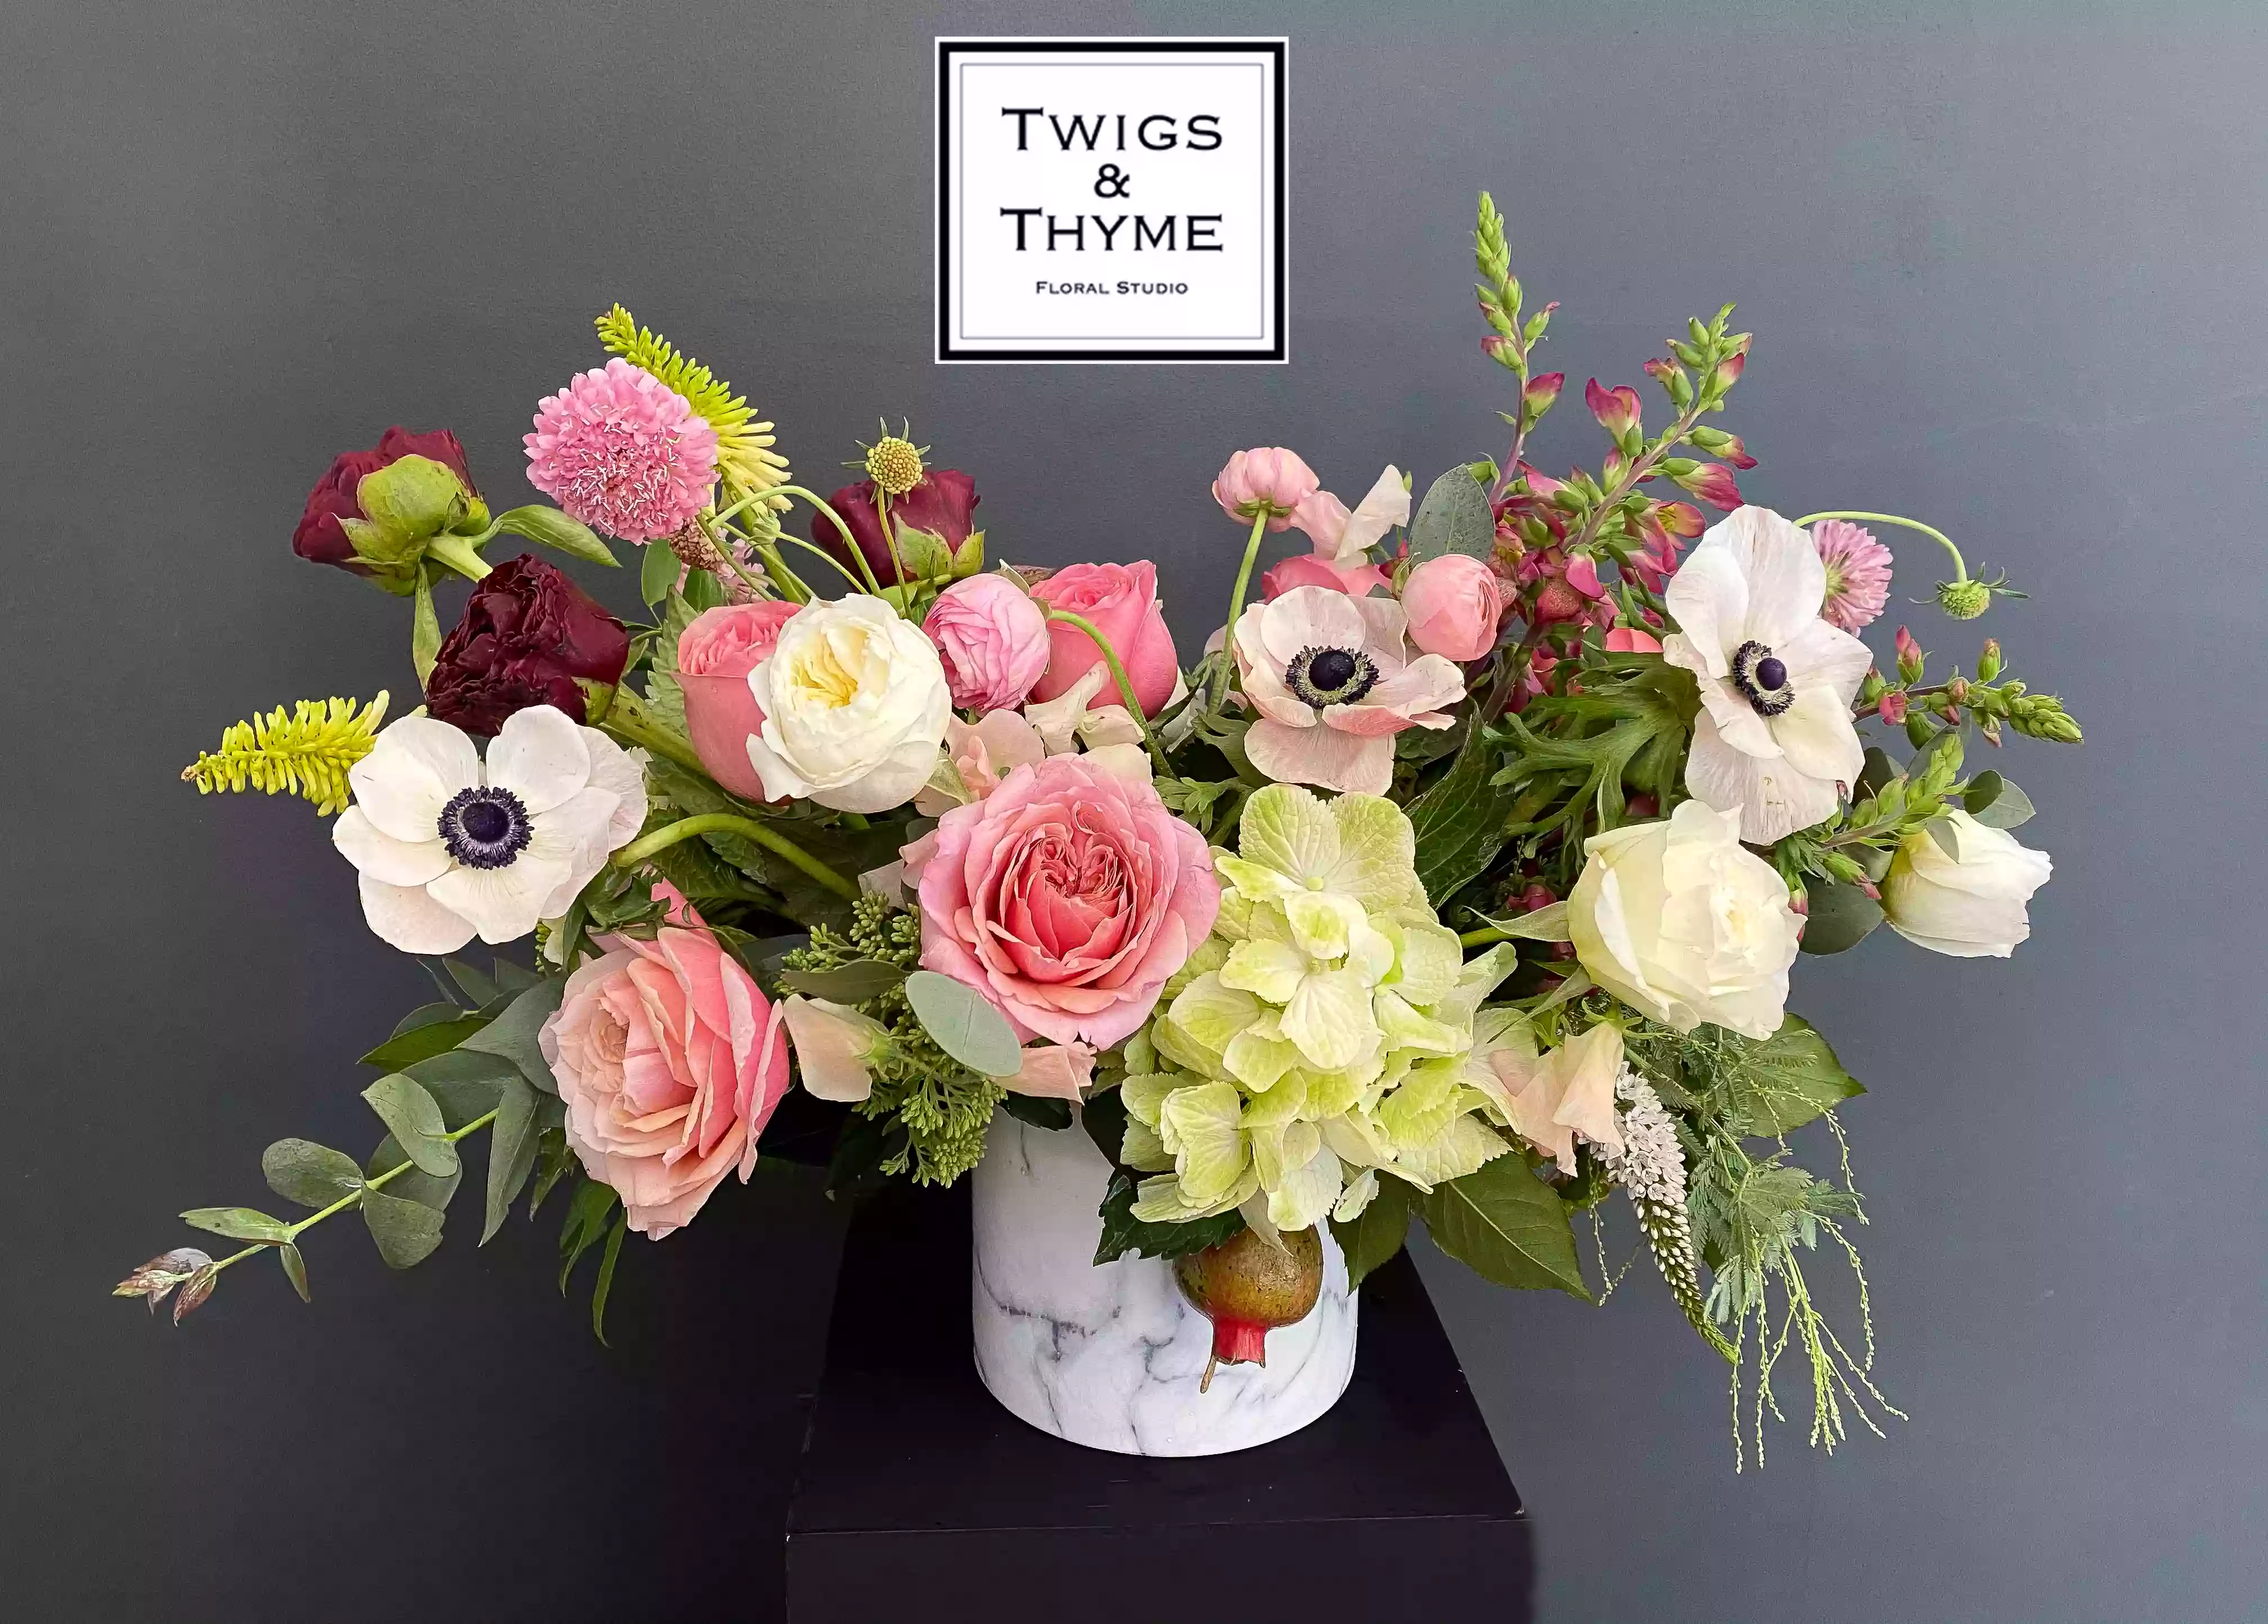 Twigs & Thyme Floral Studio